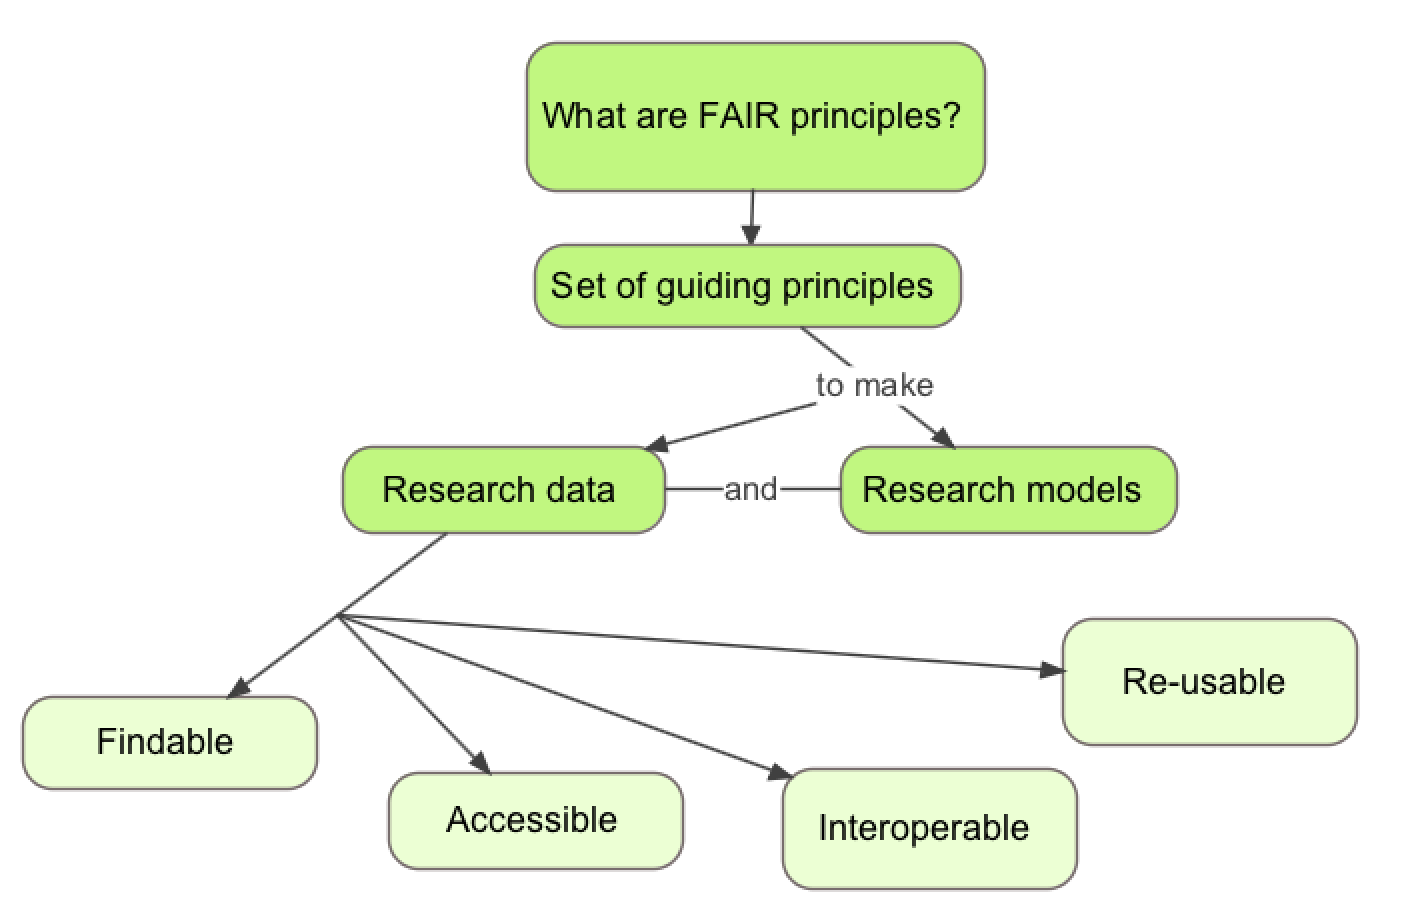 It starts on the top with a box "What are FAIR principles?". An arrow goes from this box to a box below "Set of guiding principles". From the 2nd box, an arrow goes down with "to make" written and then splits toward 2 boxes: "Research data" on the left, "Research models" on the right. A line connects these 2 boxes with "and" written on it. An arrow starts from research data and splits into 4 arrows pointing to boxes (from left to right): "Findable", "Accessible", "Interoperable", "Re-usable". 